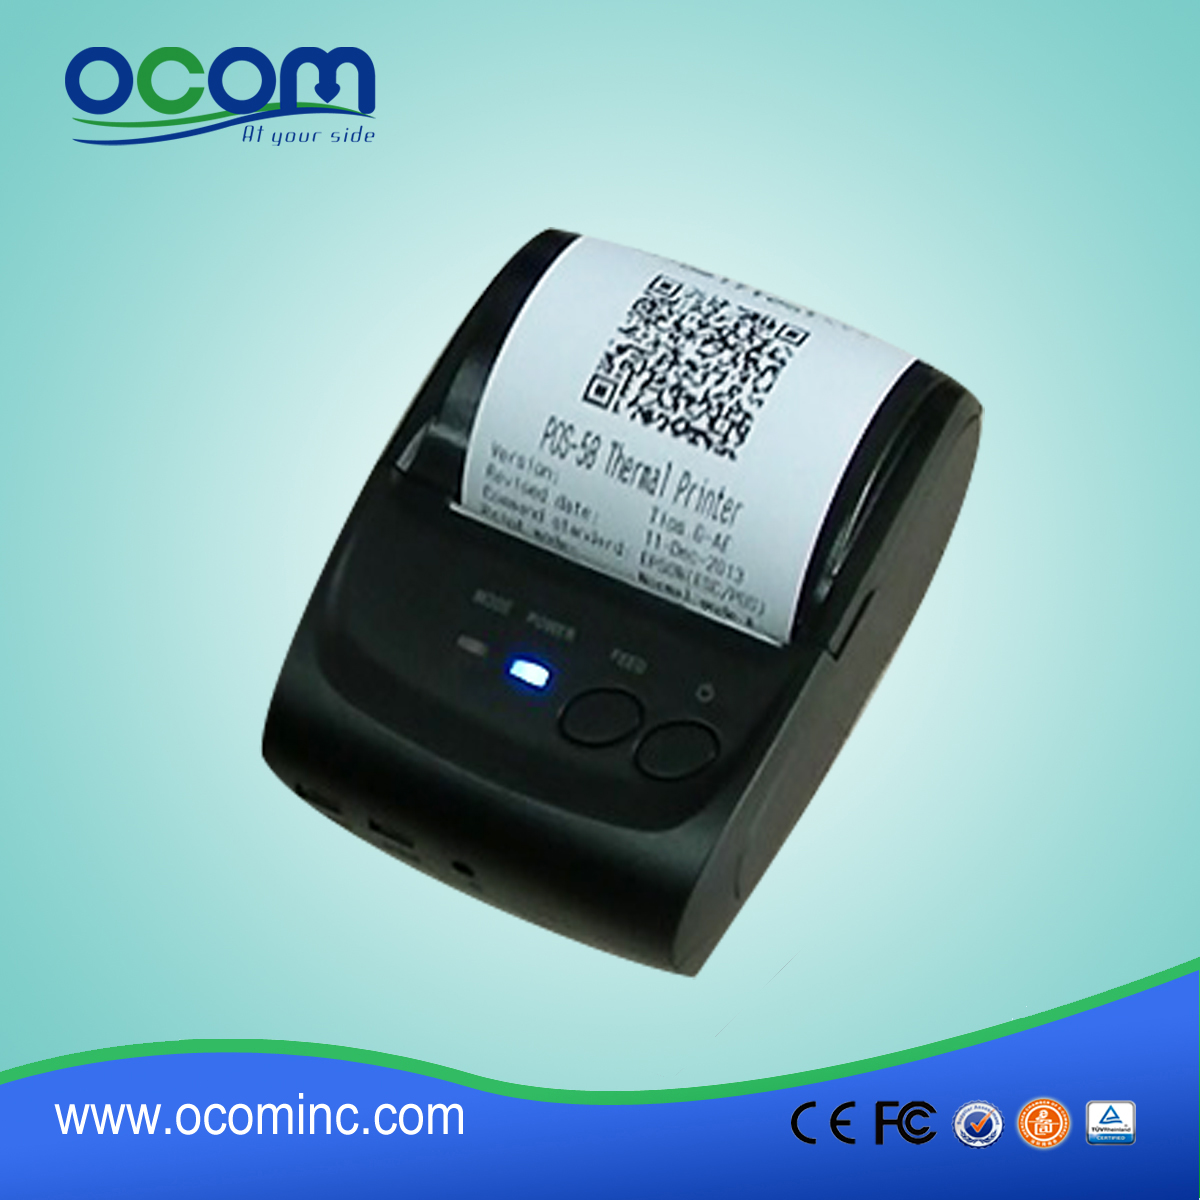 58mm Android Portable USB Bluetooth thermische printer - OCPP-M05